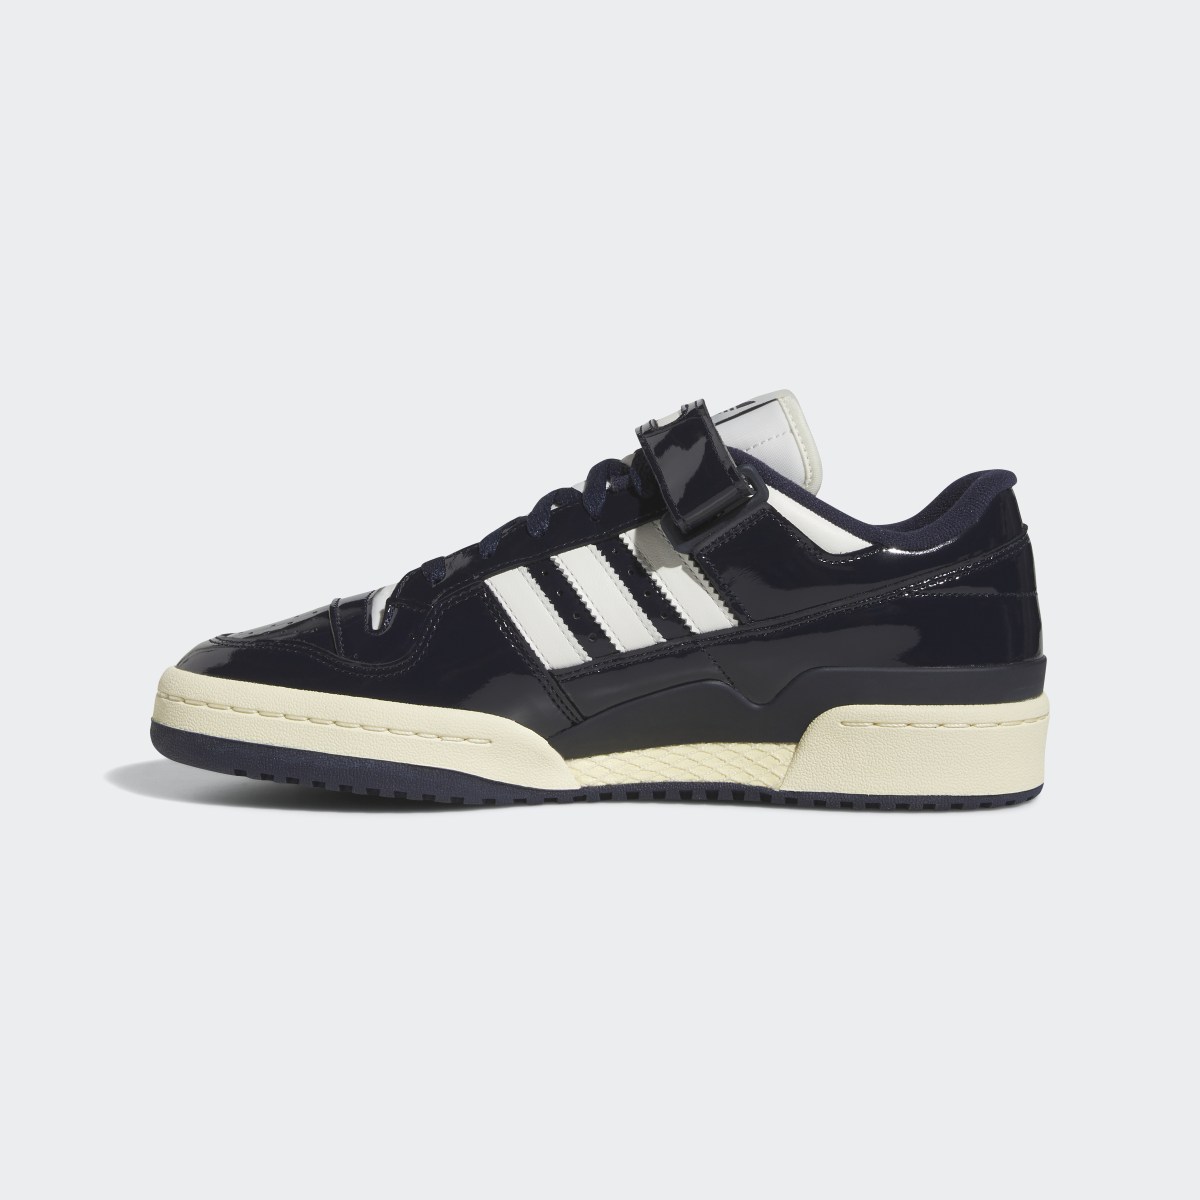 Adidas Forum 84 Low Shoes. 7